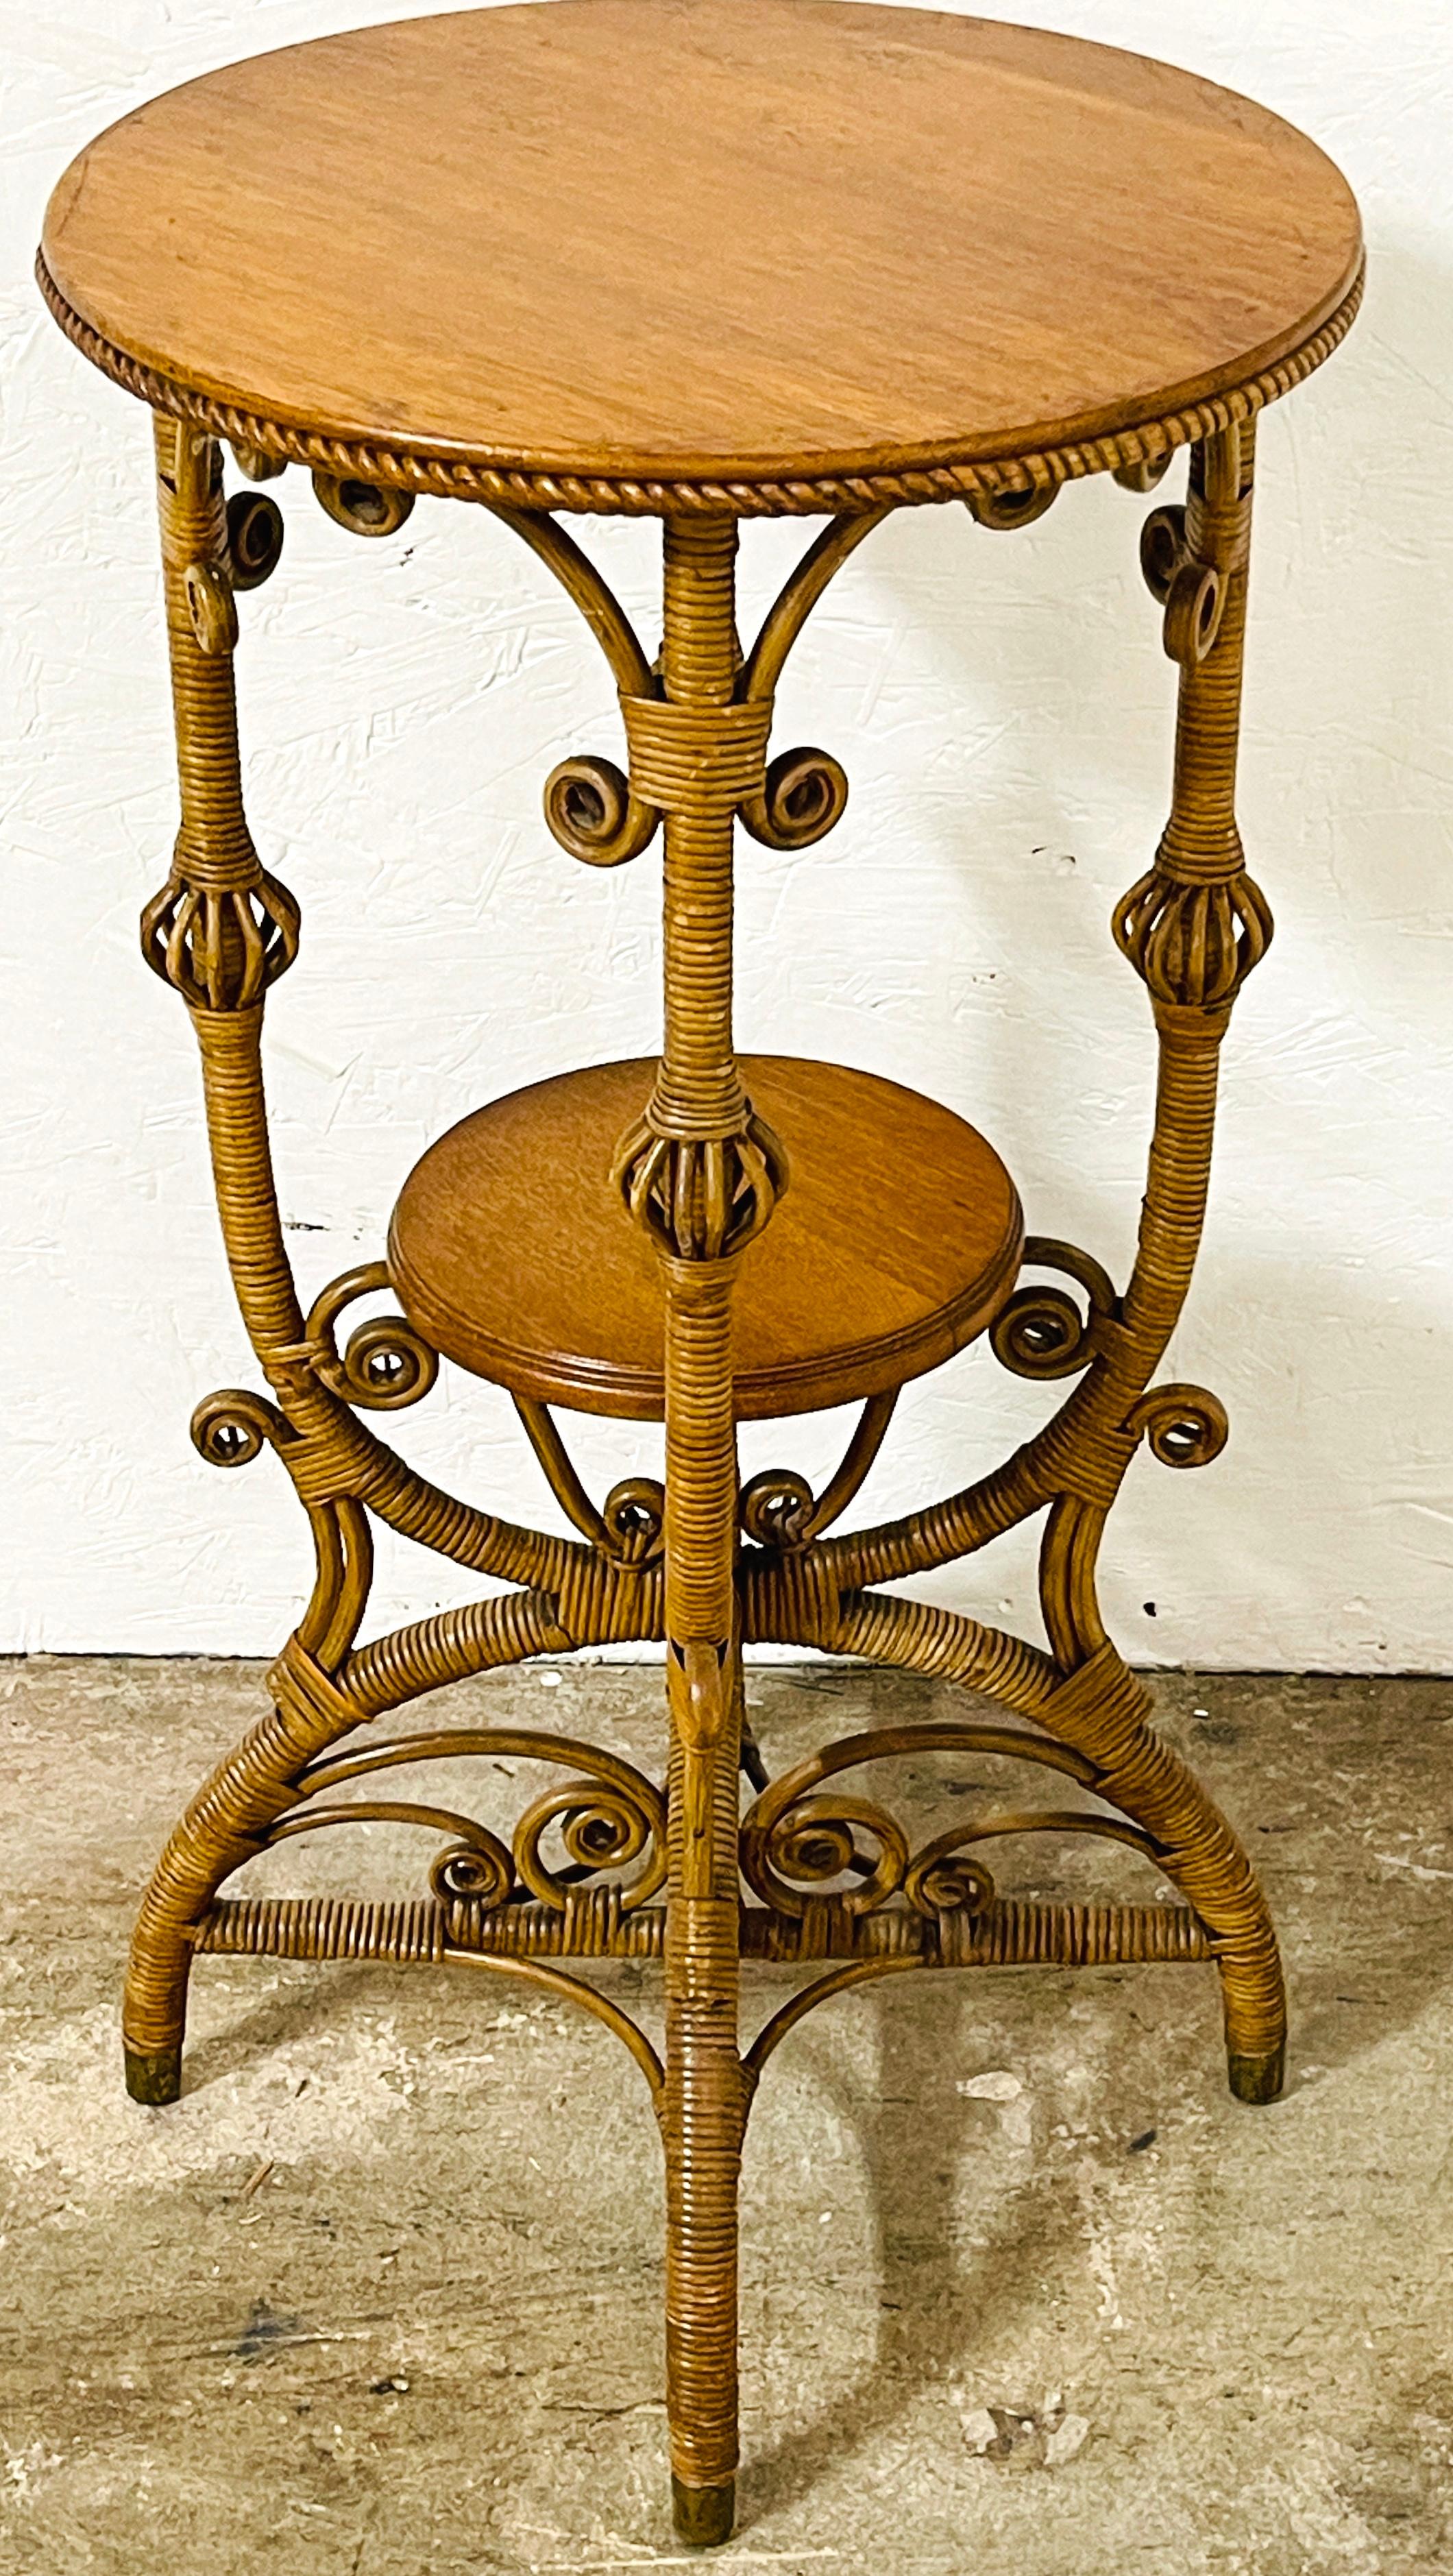 19th Century American Wicker & Oak Stick & Ball Variation Table by Heywood-Wakefield  For Sale